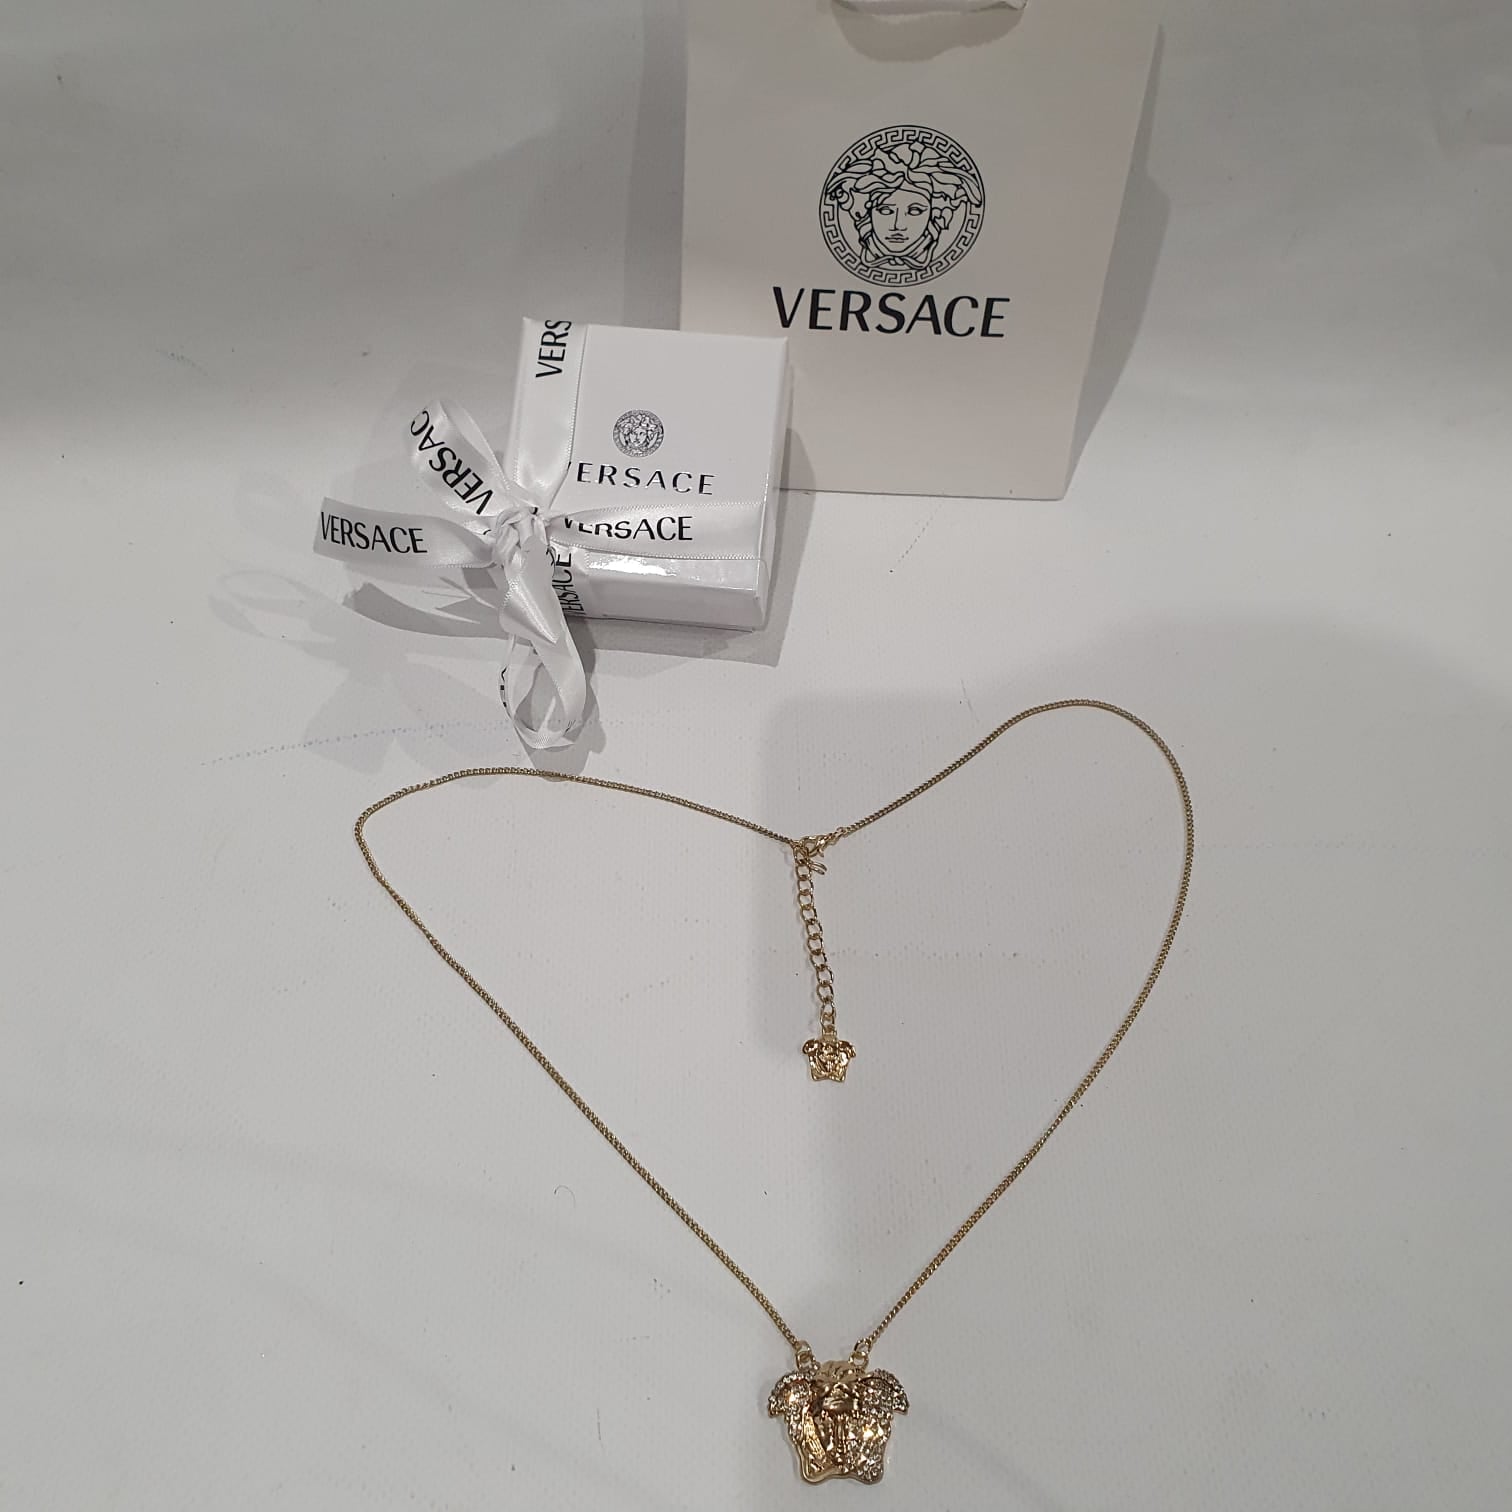 Versace Necklace and Earrings